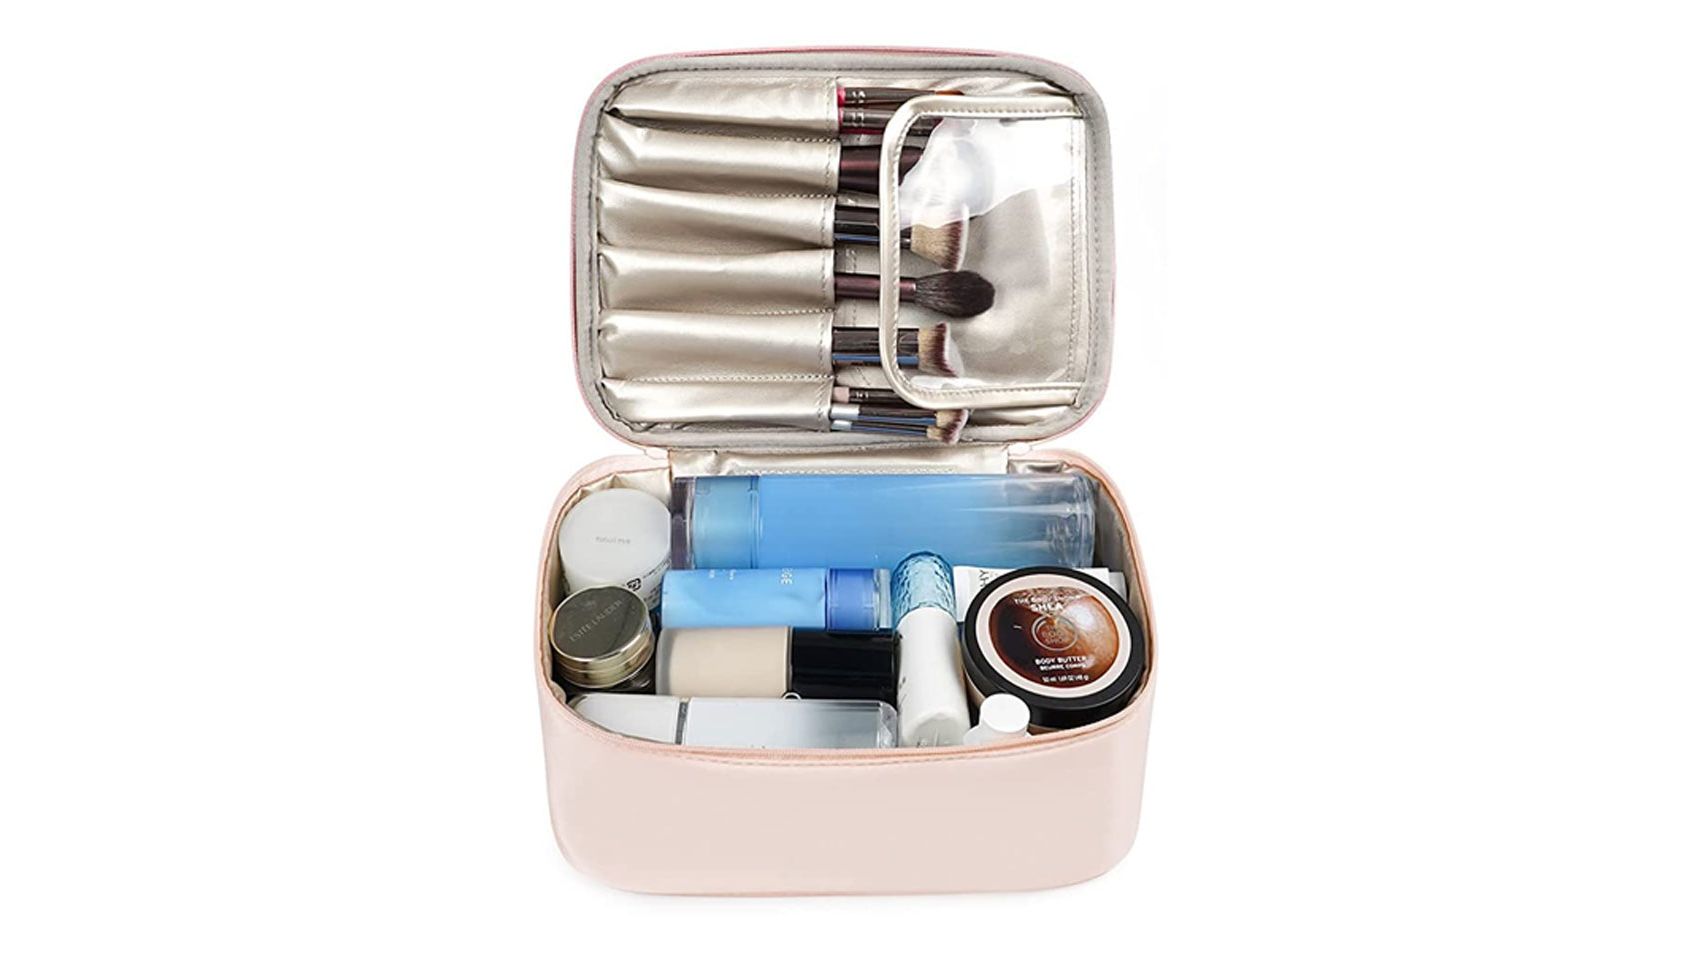 25 best makeup organizers of 2023 to keep your cosmetics clutter-free ...